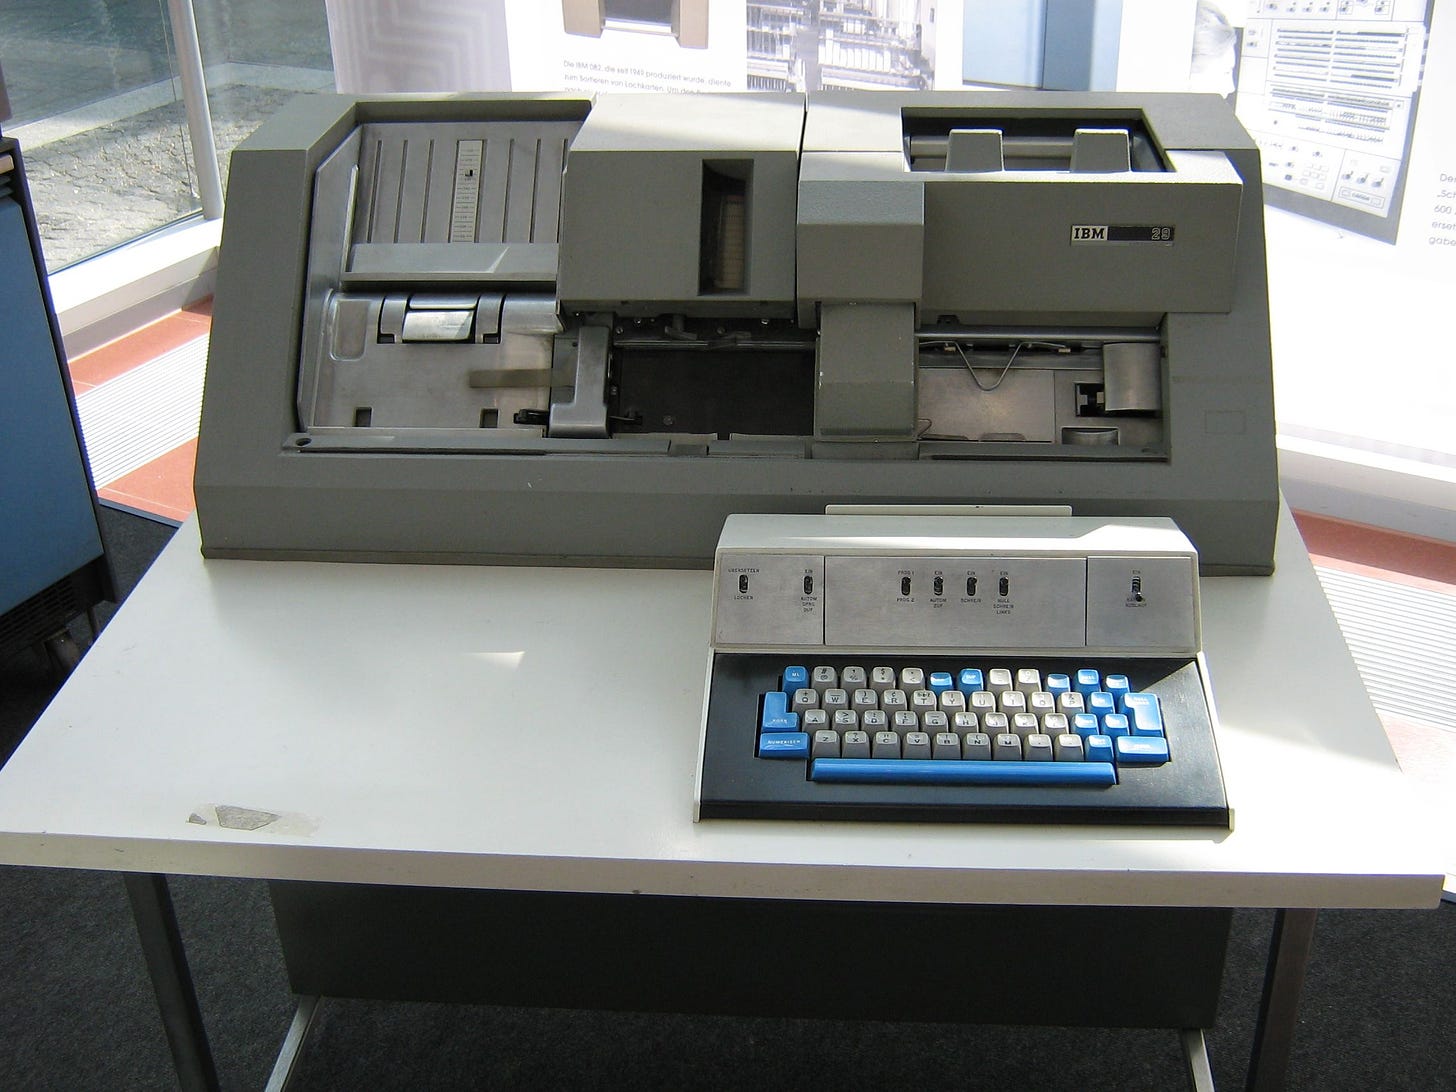 Two pieces, keyboard and card hopper. The keyboard is relatively small; the hopper is 3-5 feet side; 1-2 feet tall, and 1-2 feed deep.